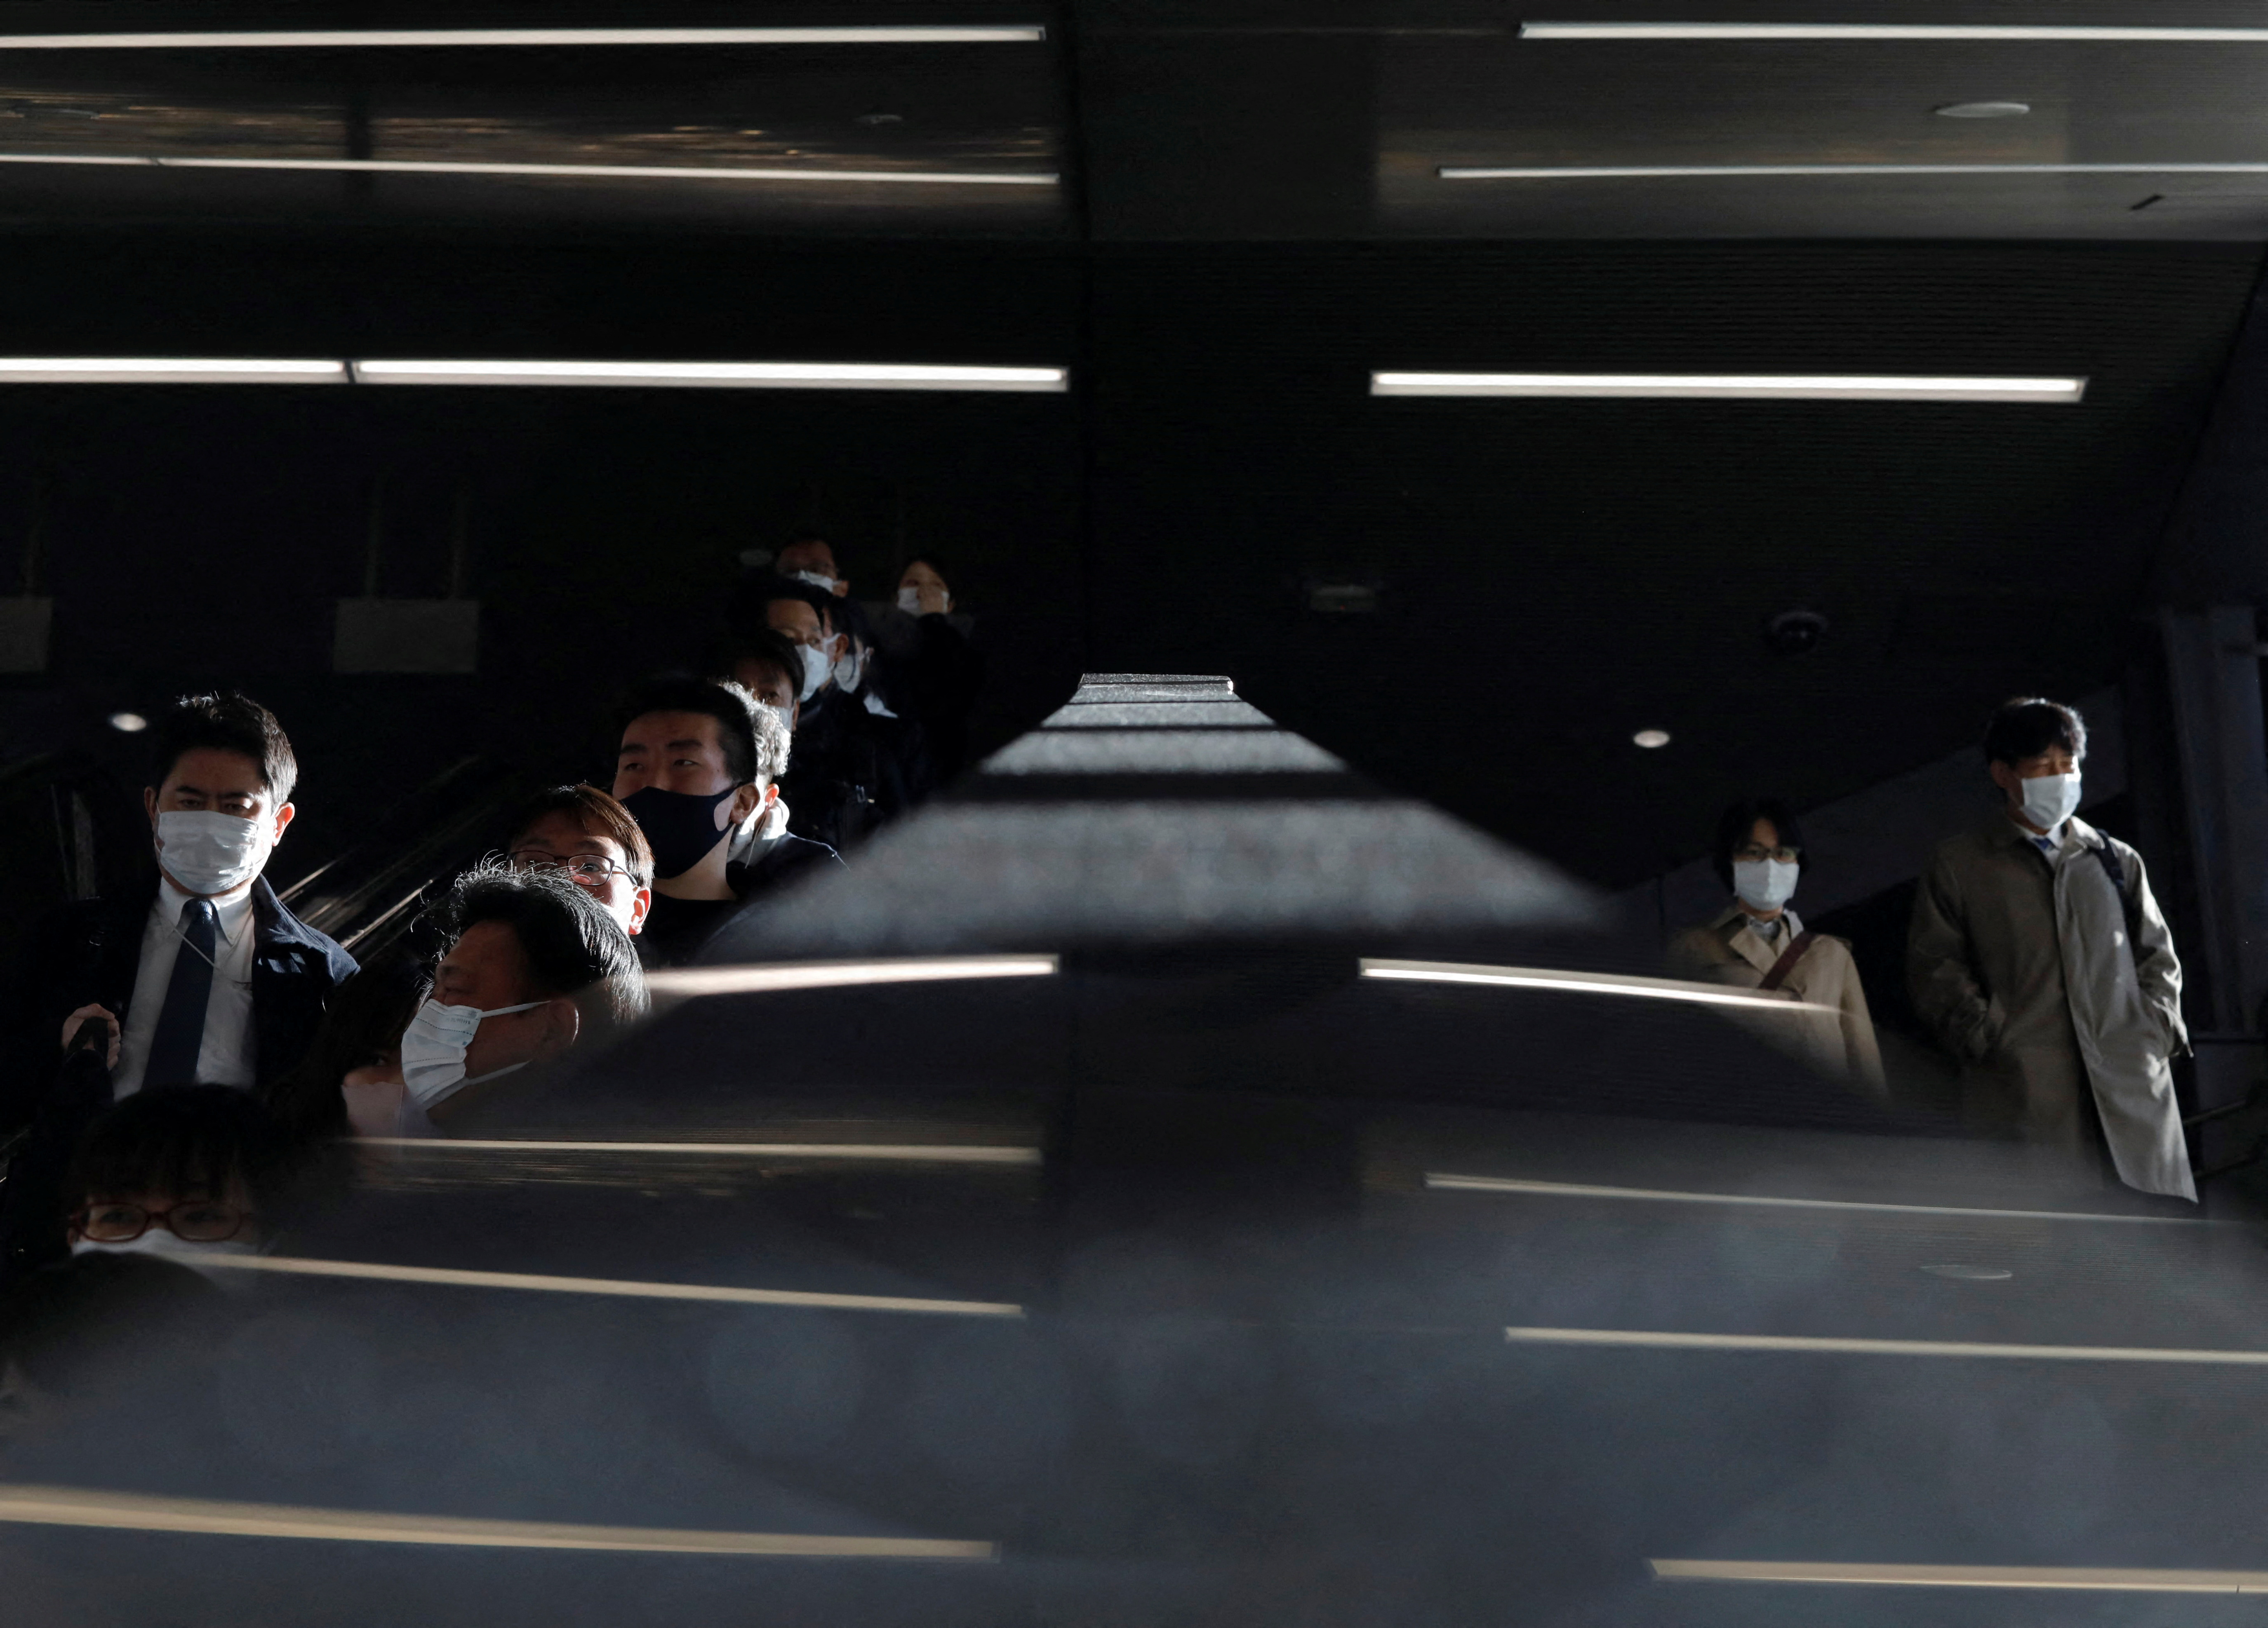 Passengers wearing protective face masks are pictured at a train station, amid the COVID-19 pandemic, in Tokyo